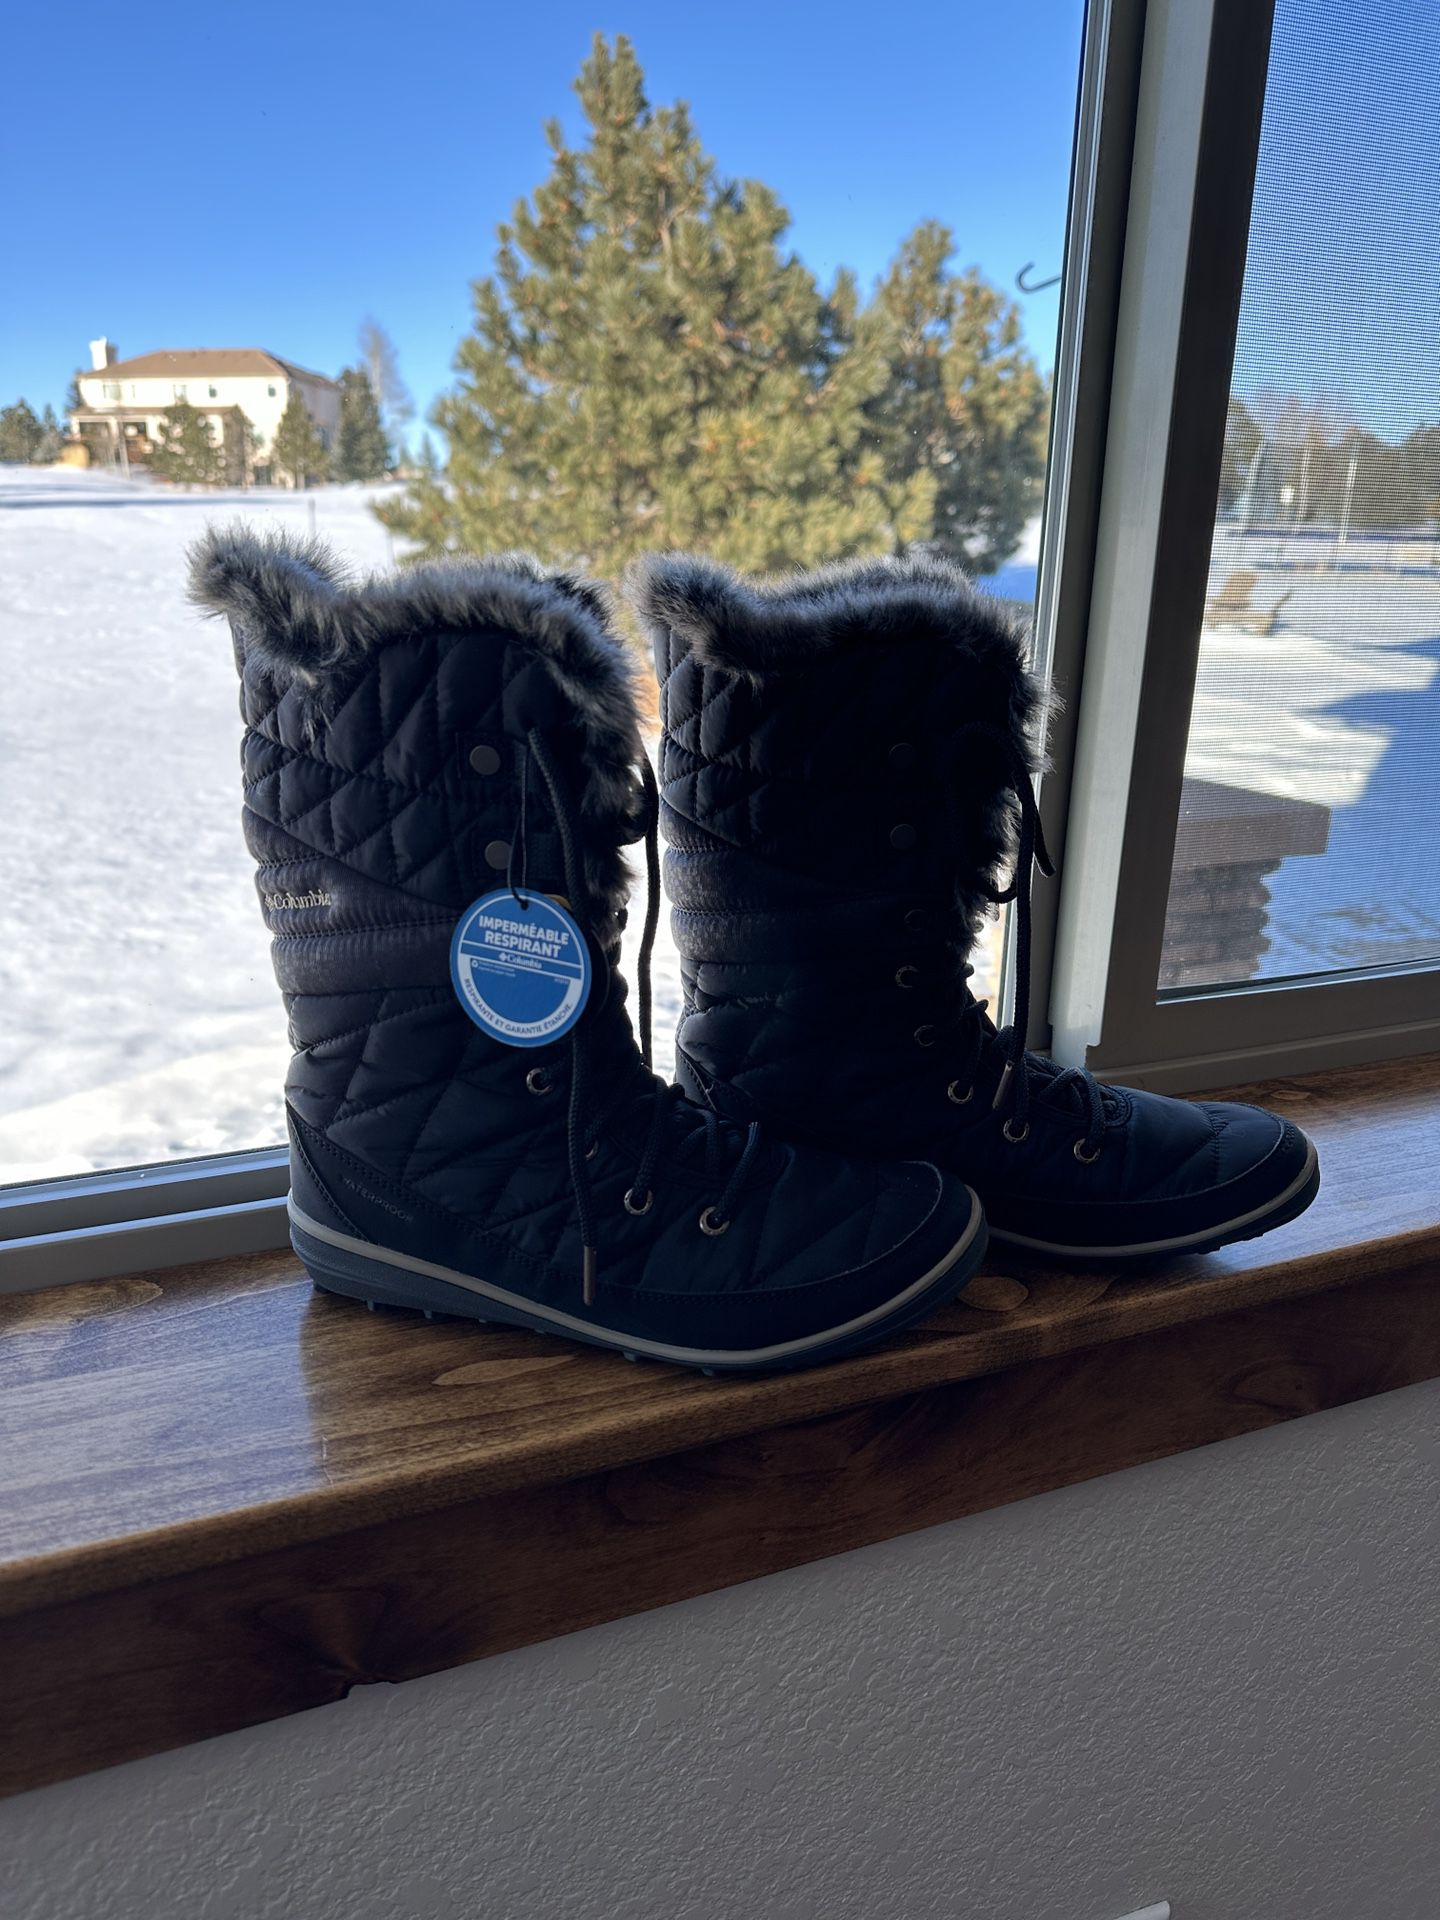 Columbia Women's LOVELAND MID OMNI-HEAT Snow Boot - Size 7.5 - New with Tags, Never Worn